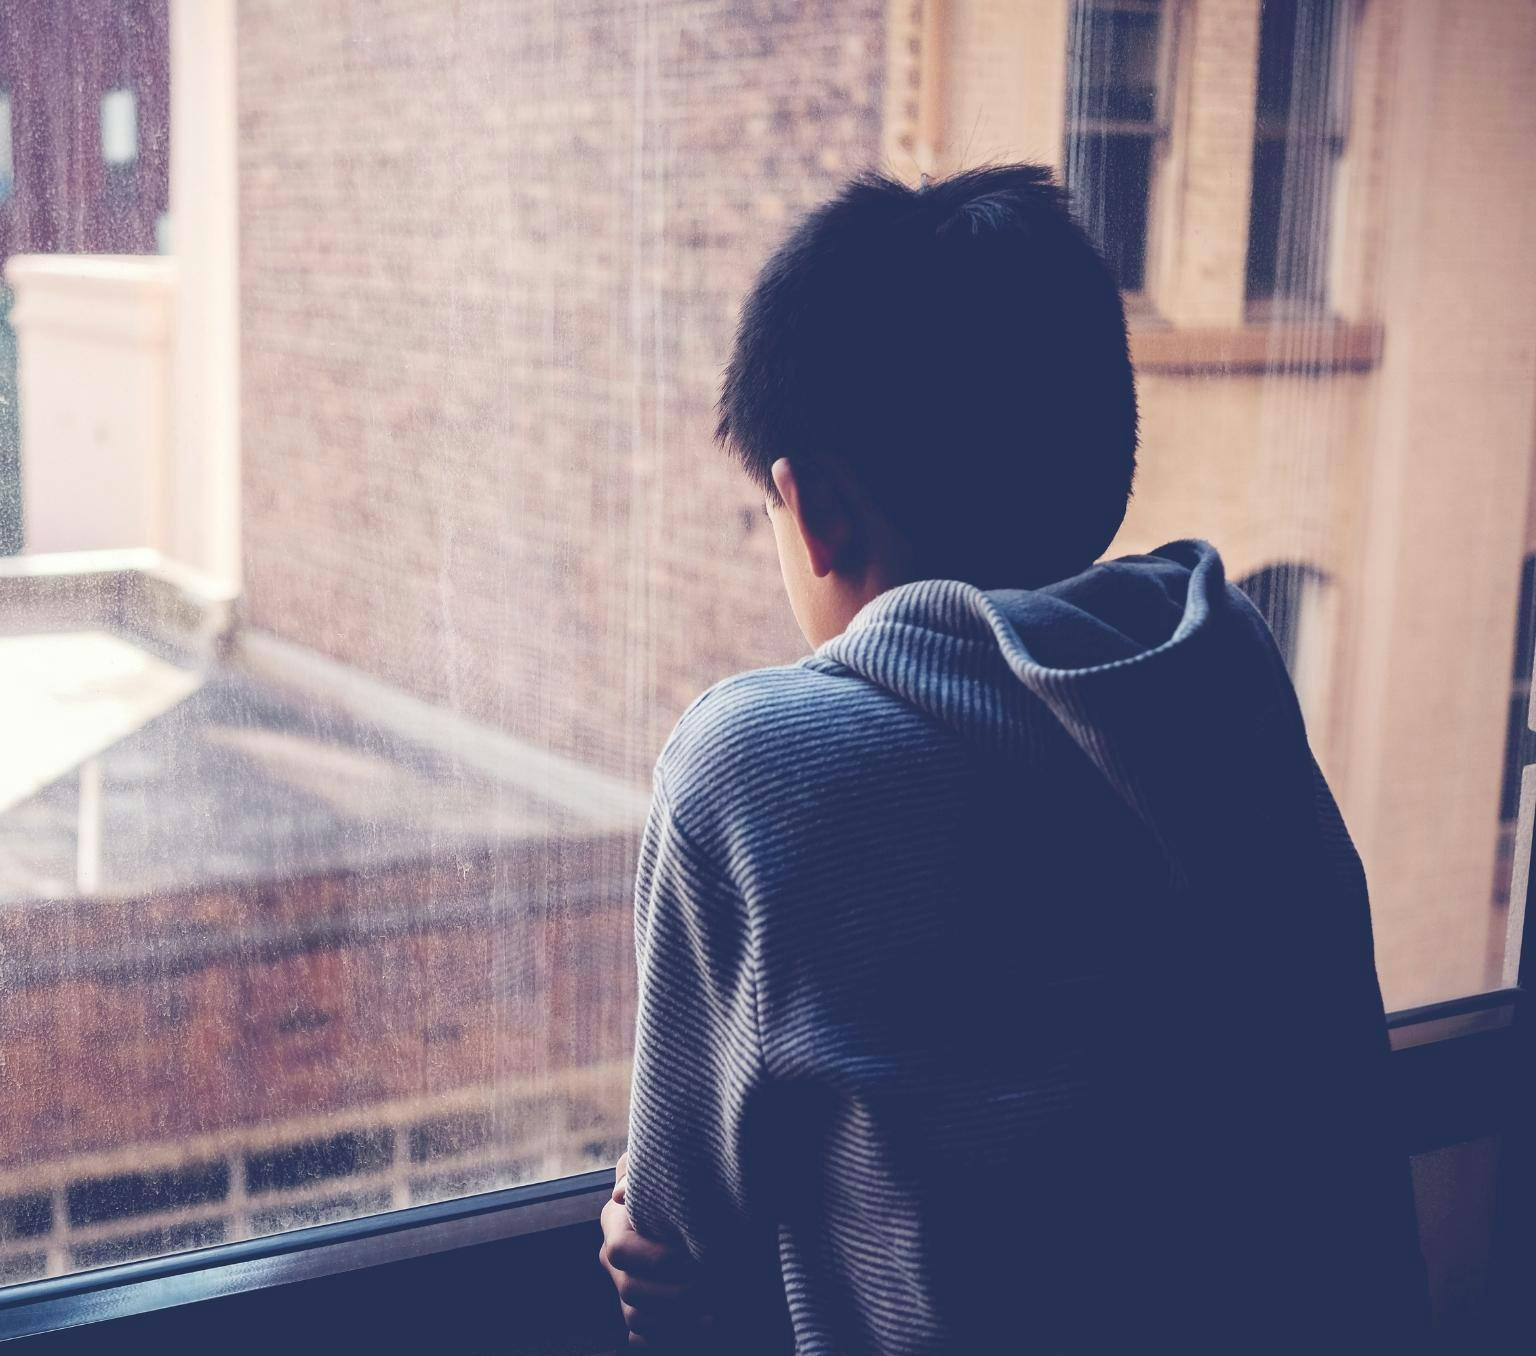 back of a boy with black hair looking out a windo onto houses with his shoulders hunched.